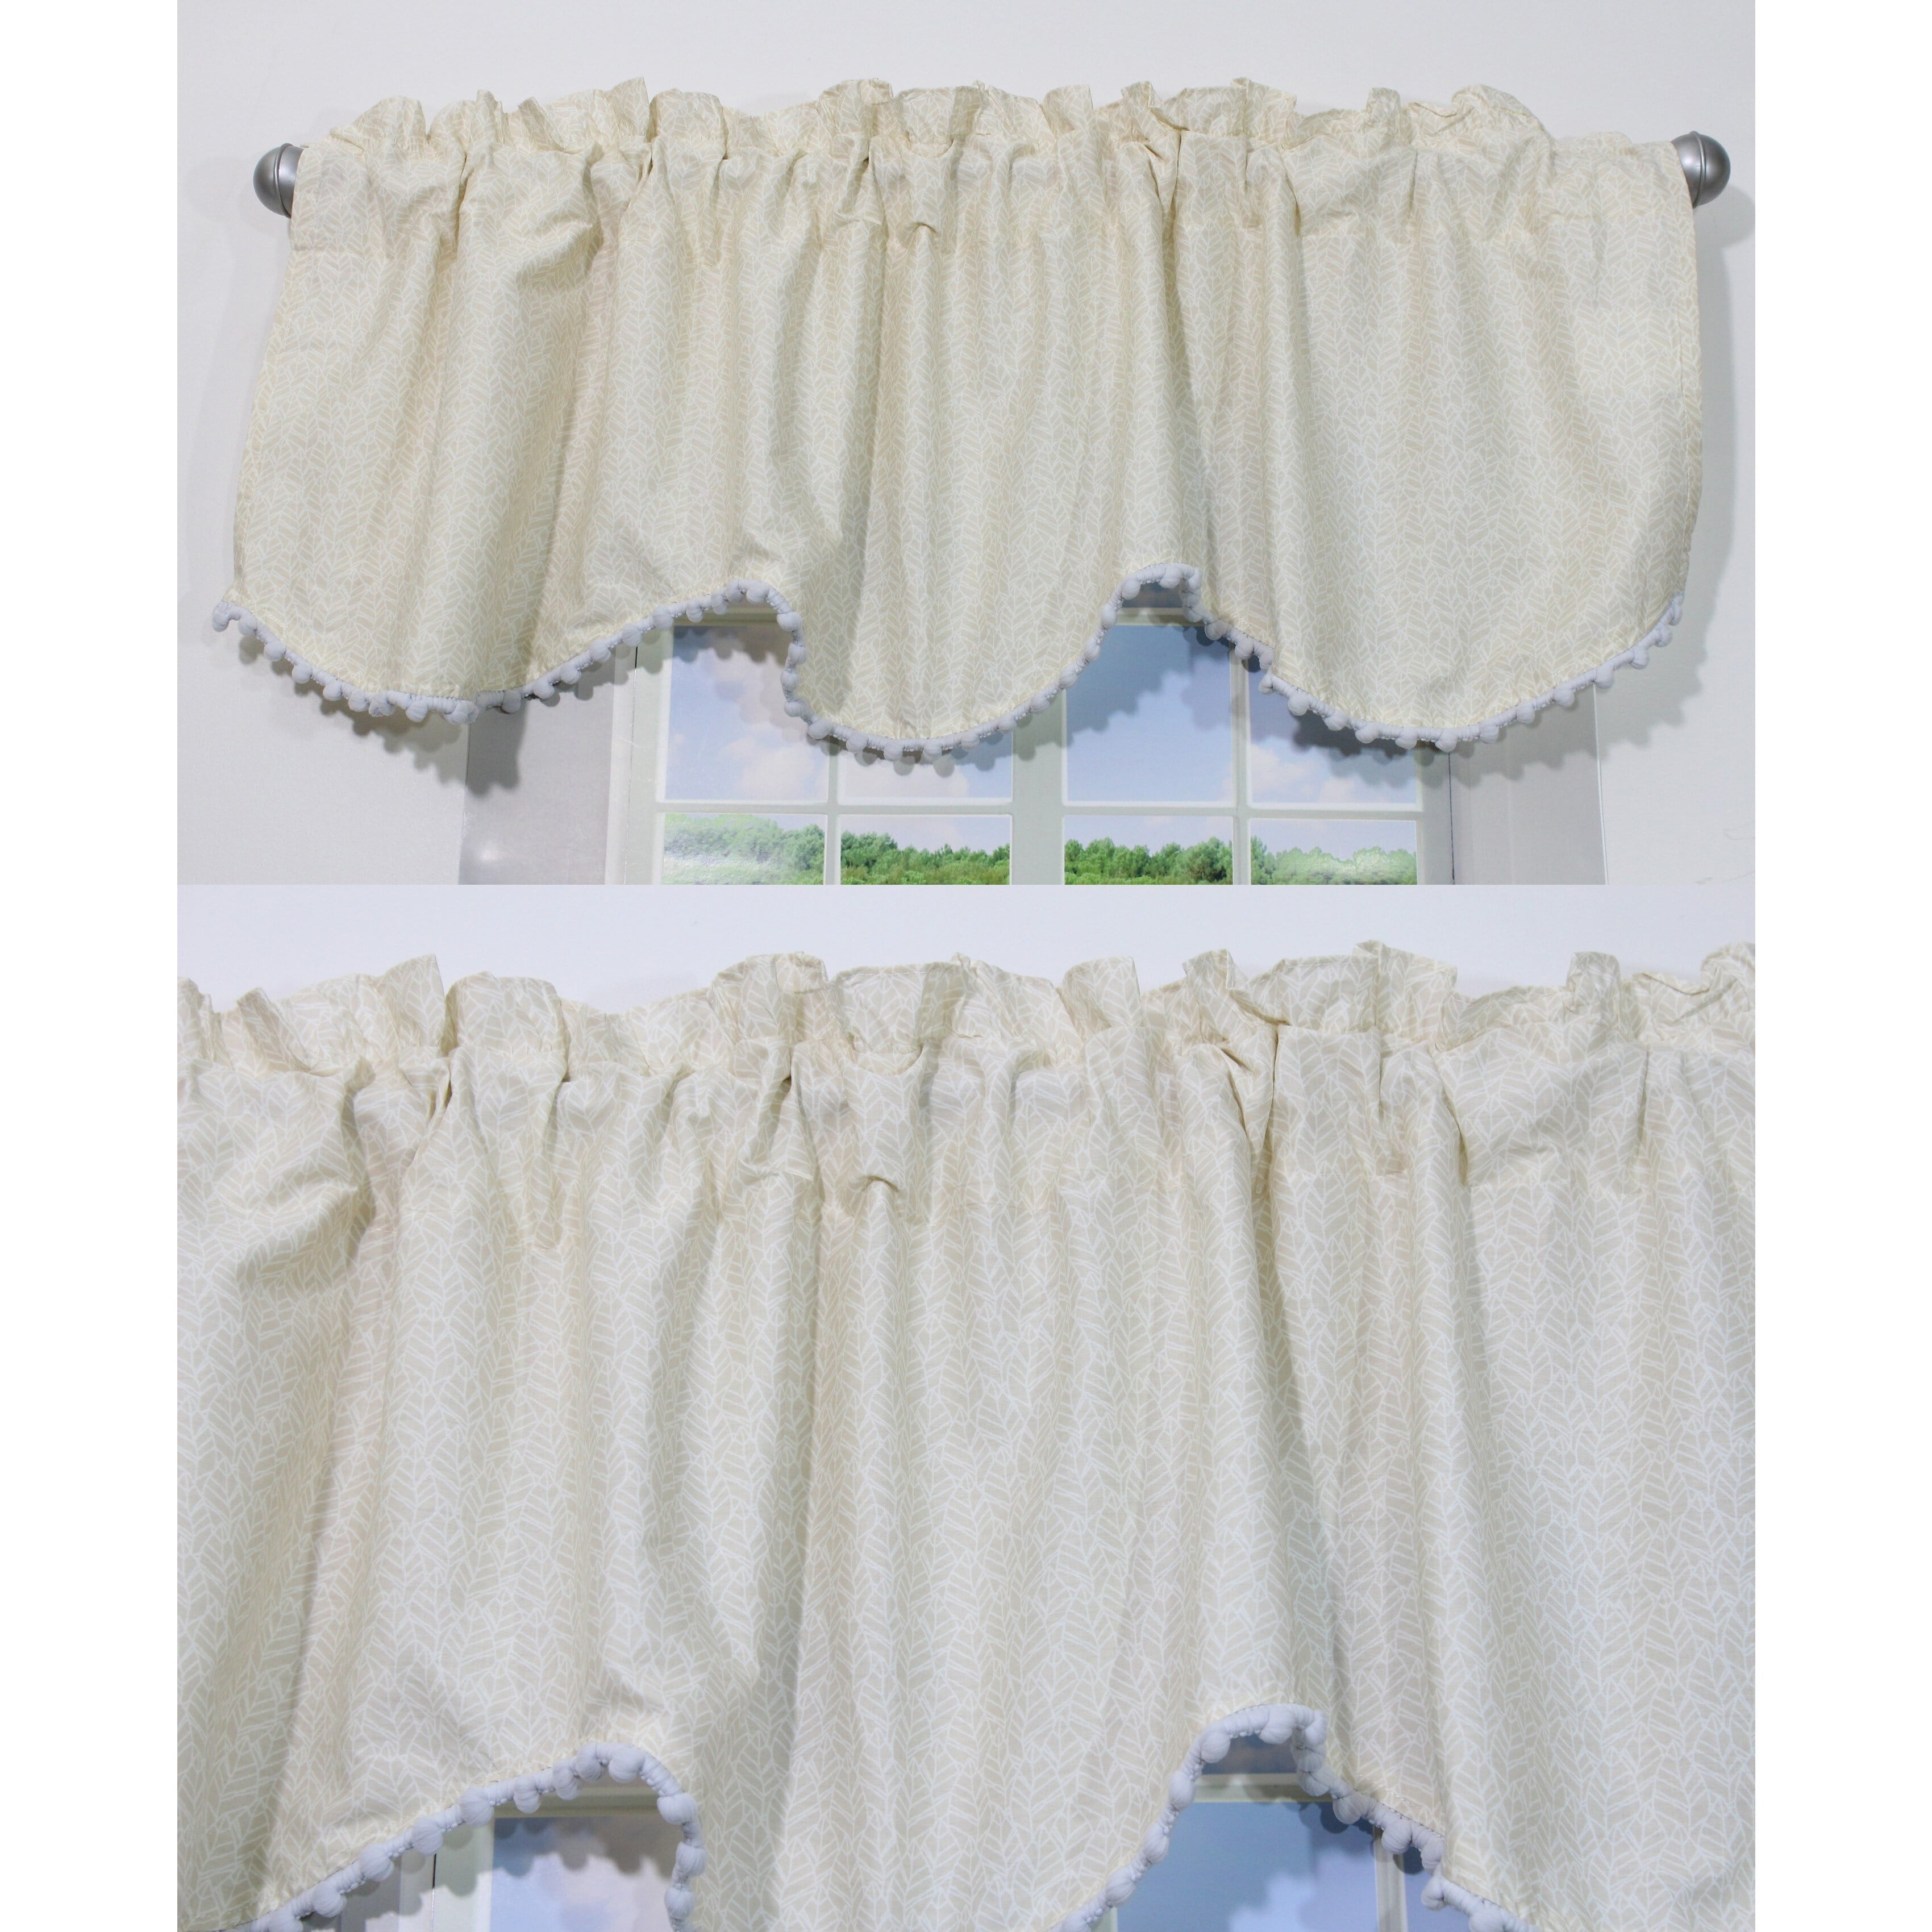 Khaki Tan Beige And White Plaid Cotton Valance Pair Crocheted Lace Wooden Beads 